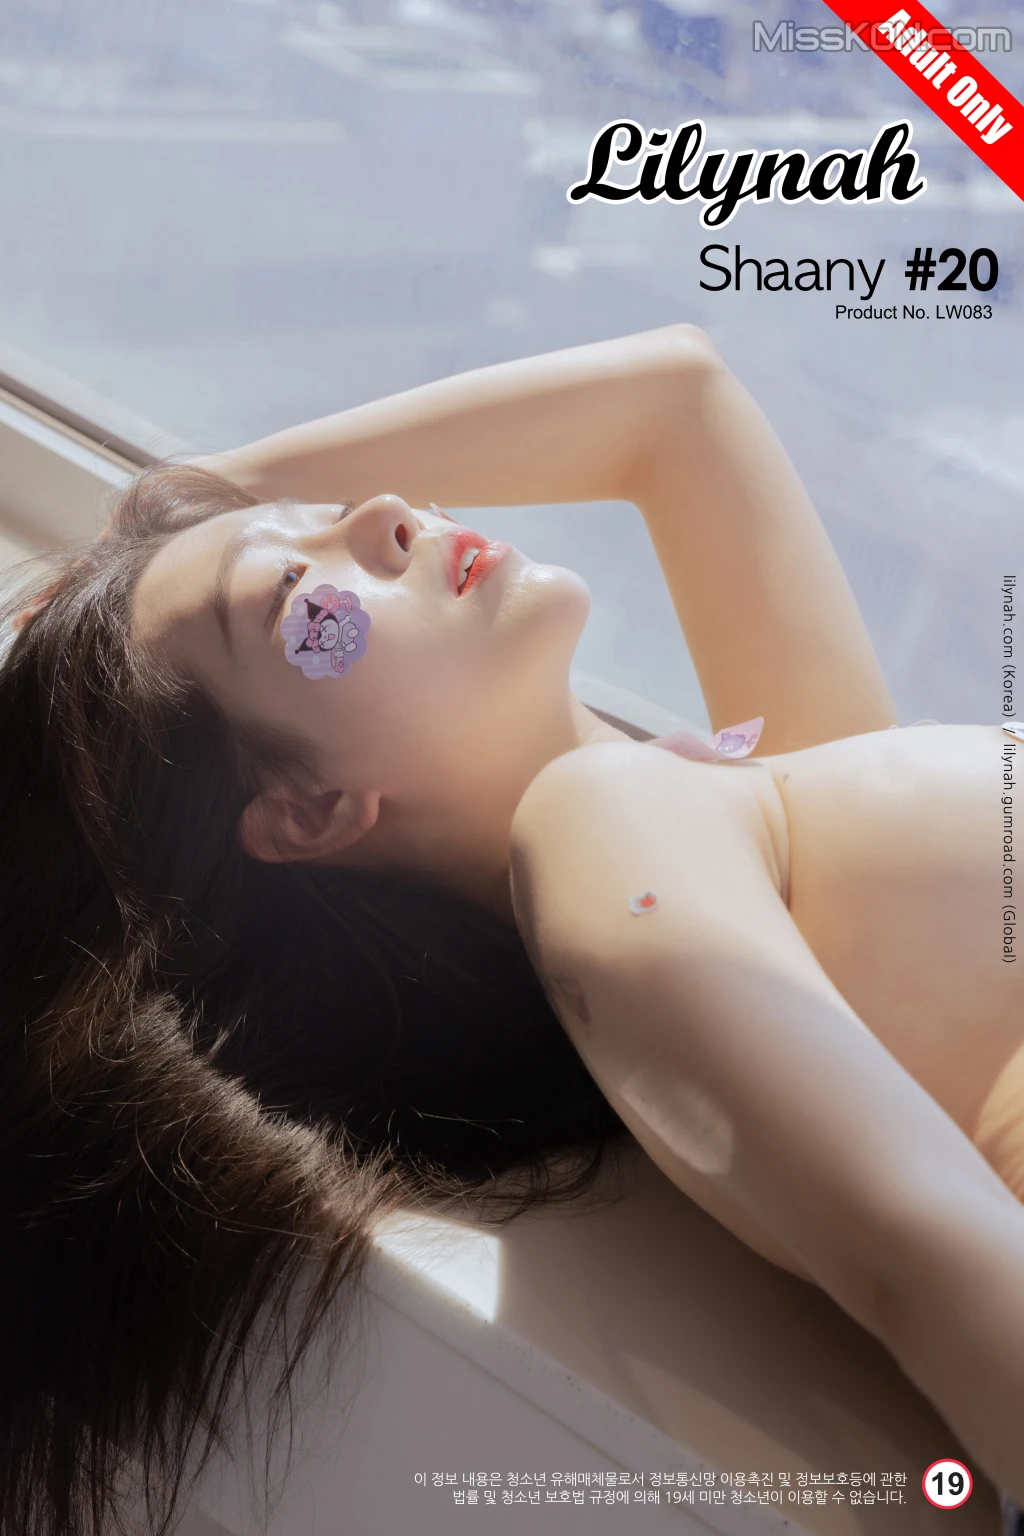 [Lilynah] LW083 Shaany (샤니): Vol.20 Lick Me (50 photos)